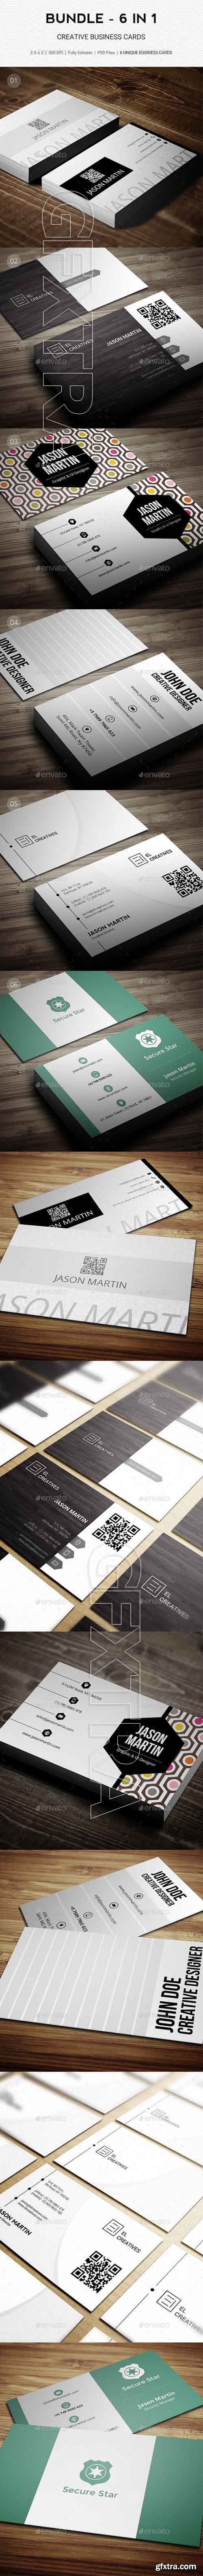 GraphicRiver - Bundle - Pro 6 in 1 - Creative Business Cards - B48 20602468